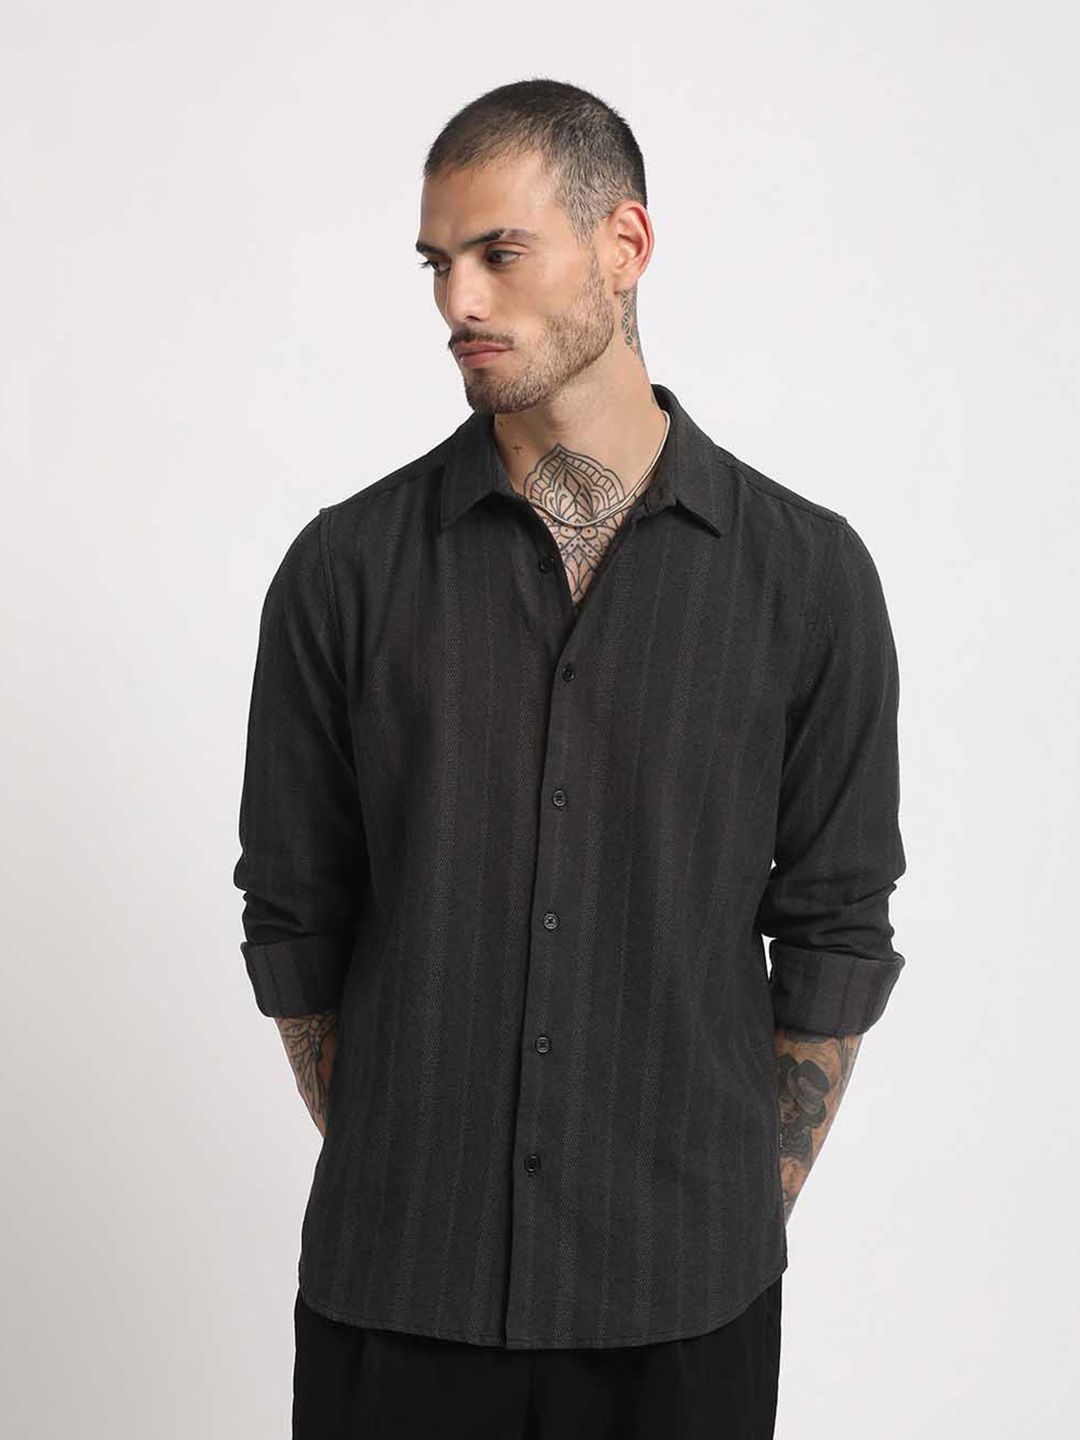 THE BEAR HOUSE Slim Fit Vertical Striped Twill Weave Casual Shirt